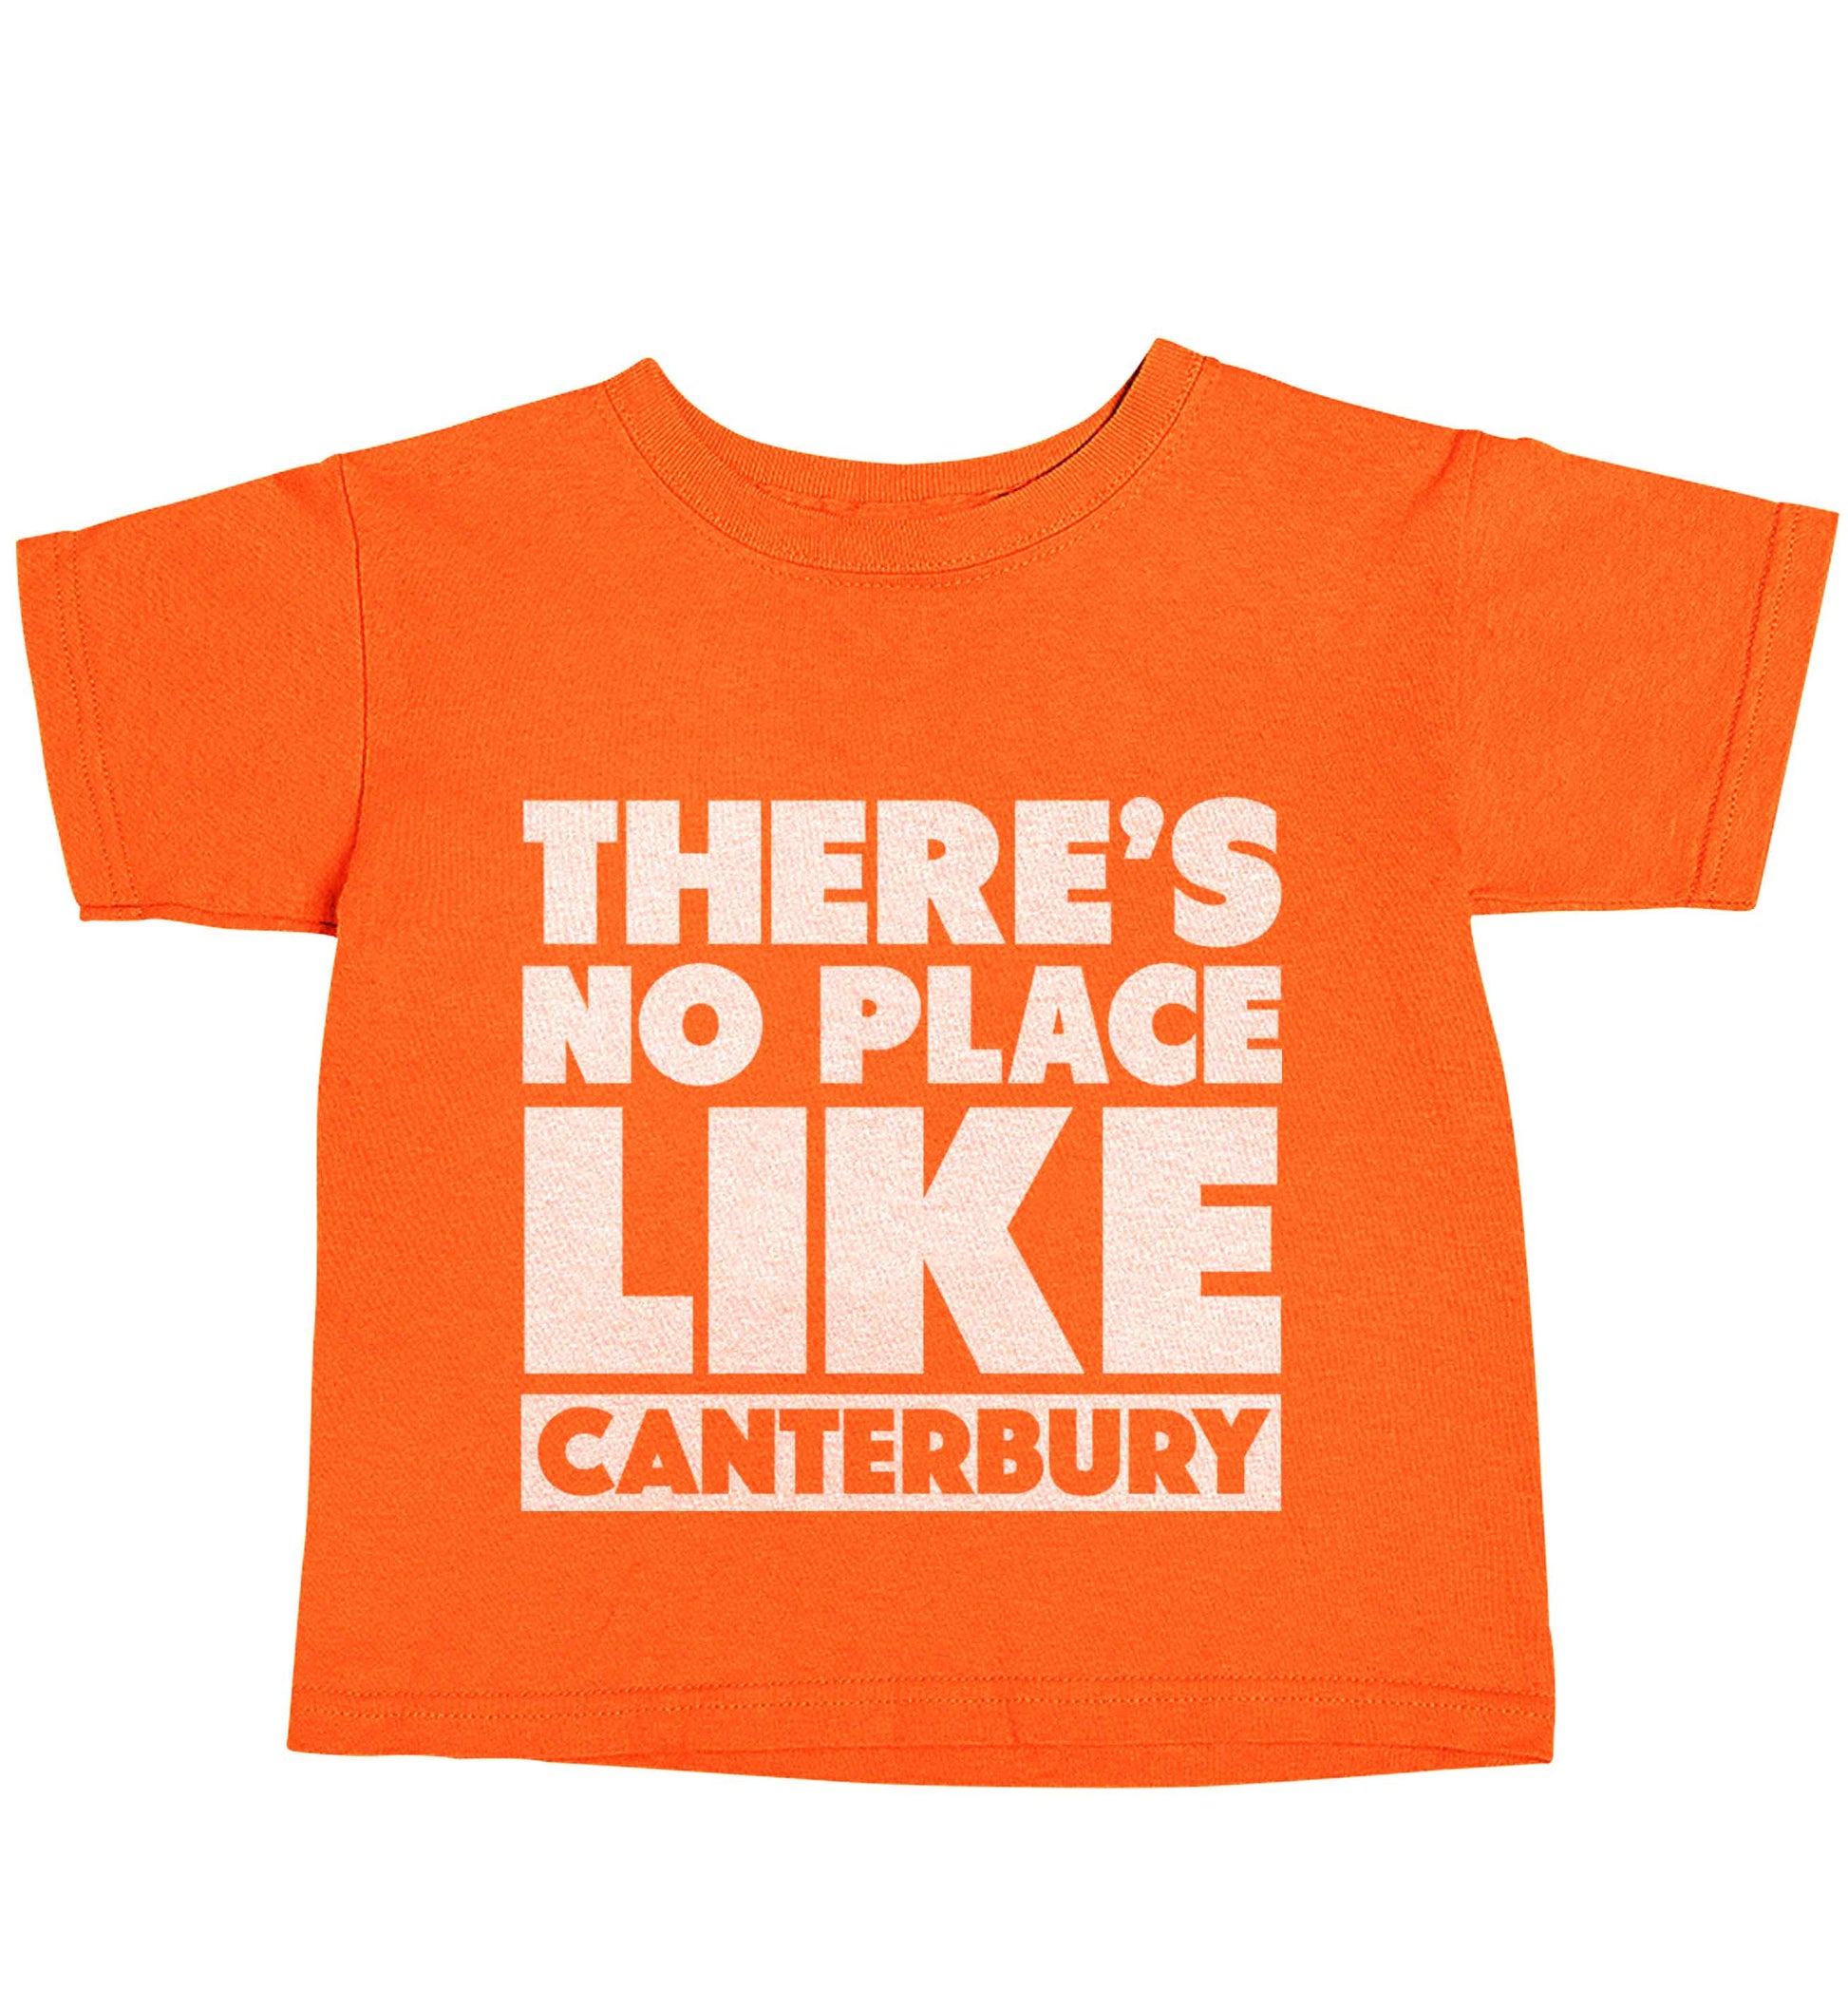 There's no place like Canterbury orange baby toddler Tshirt 2 Years